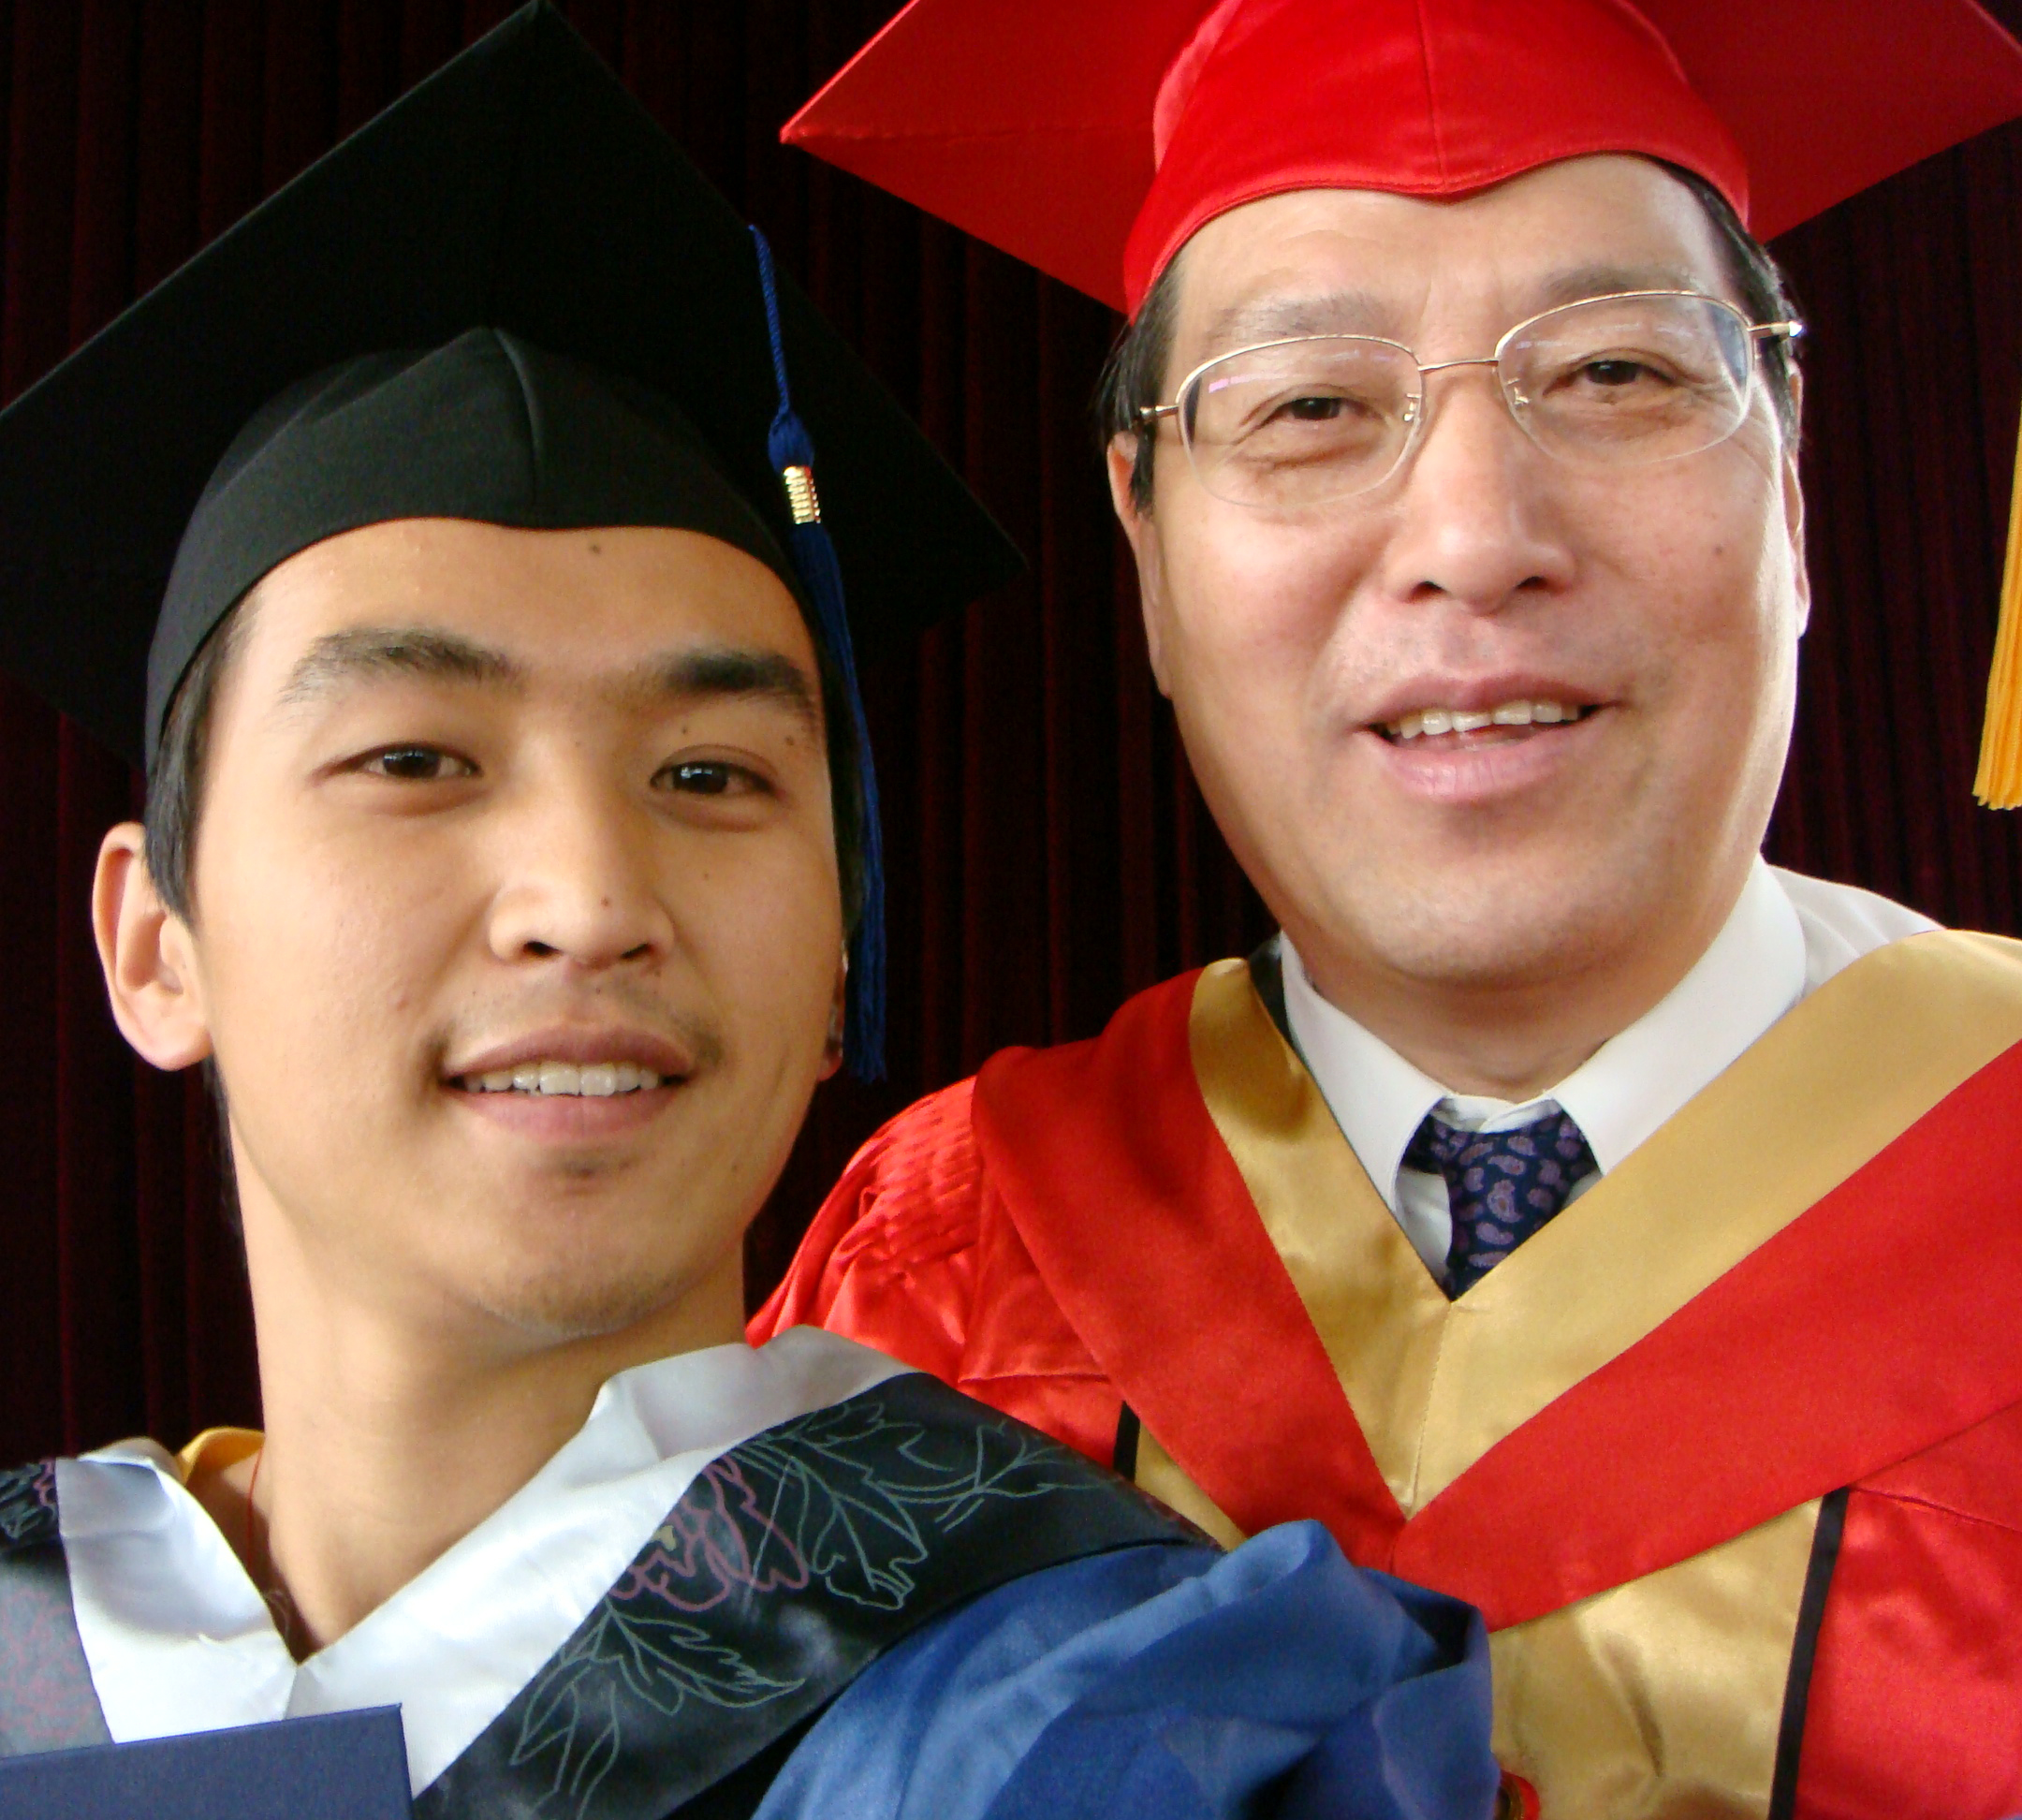 Chancellor of ECNU and I at commencement on June 23, 2010